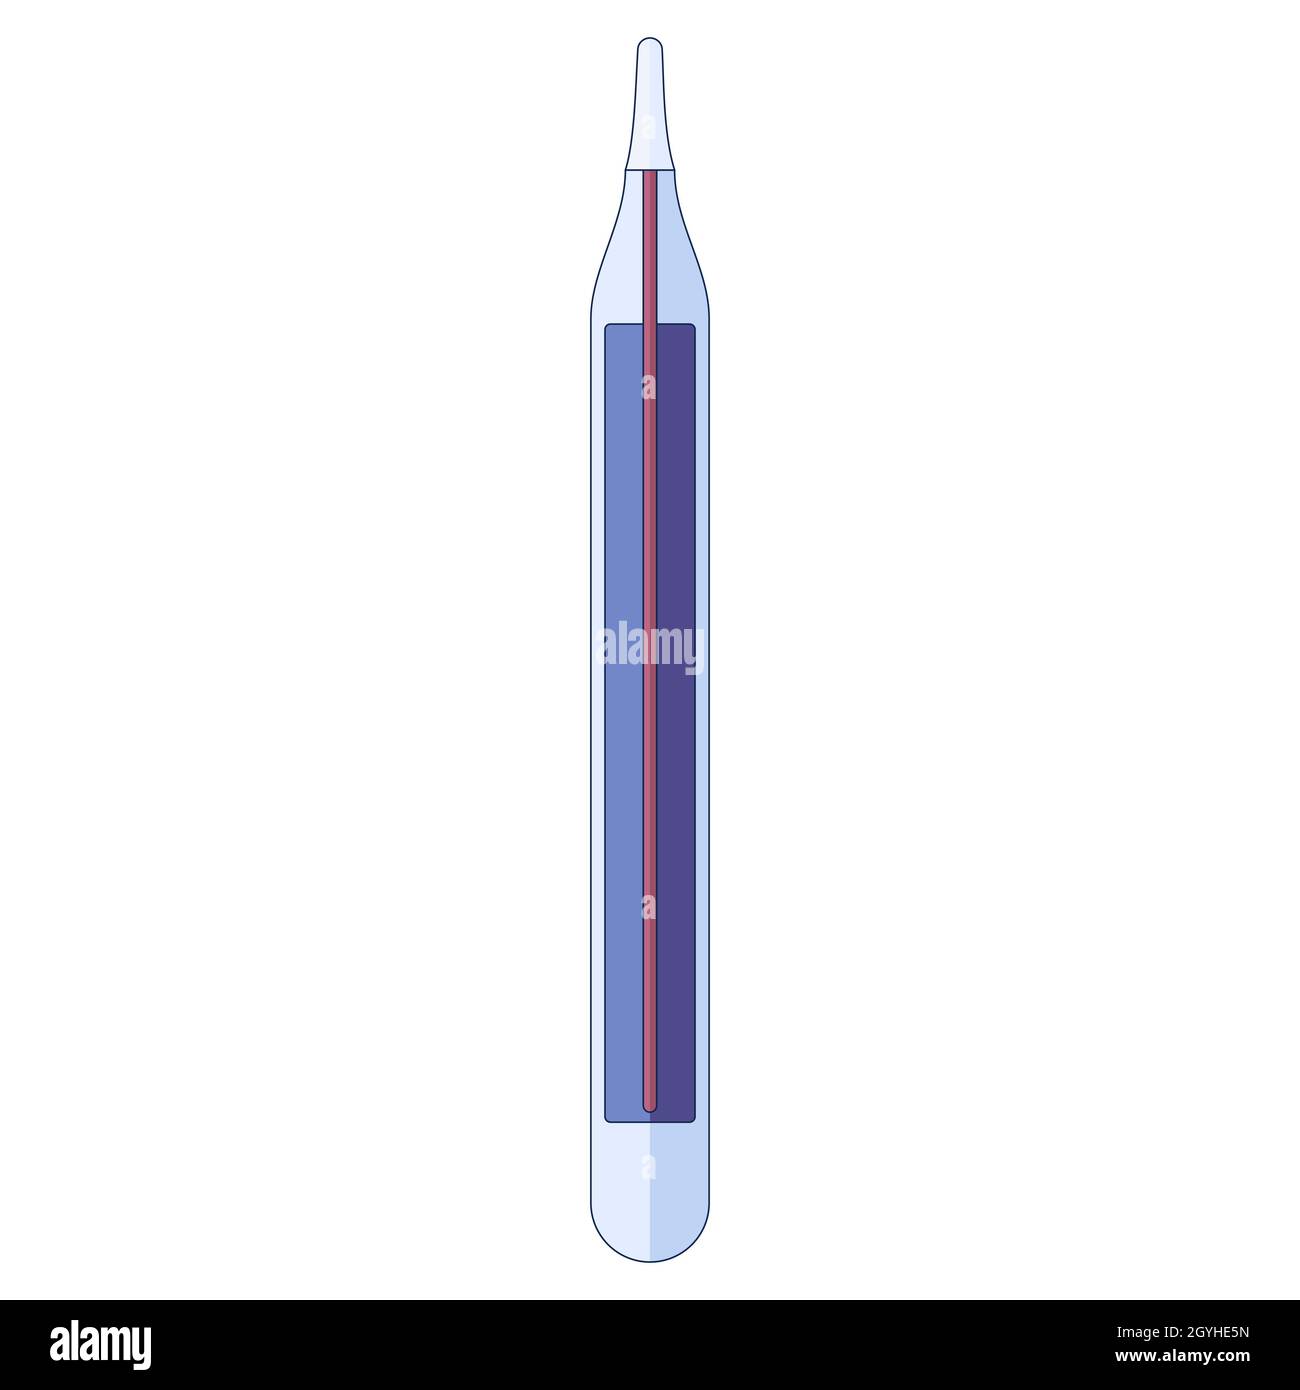 mercury thermometer, body temperature check in a flat style isolated on a white background Stock Vector